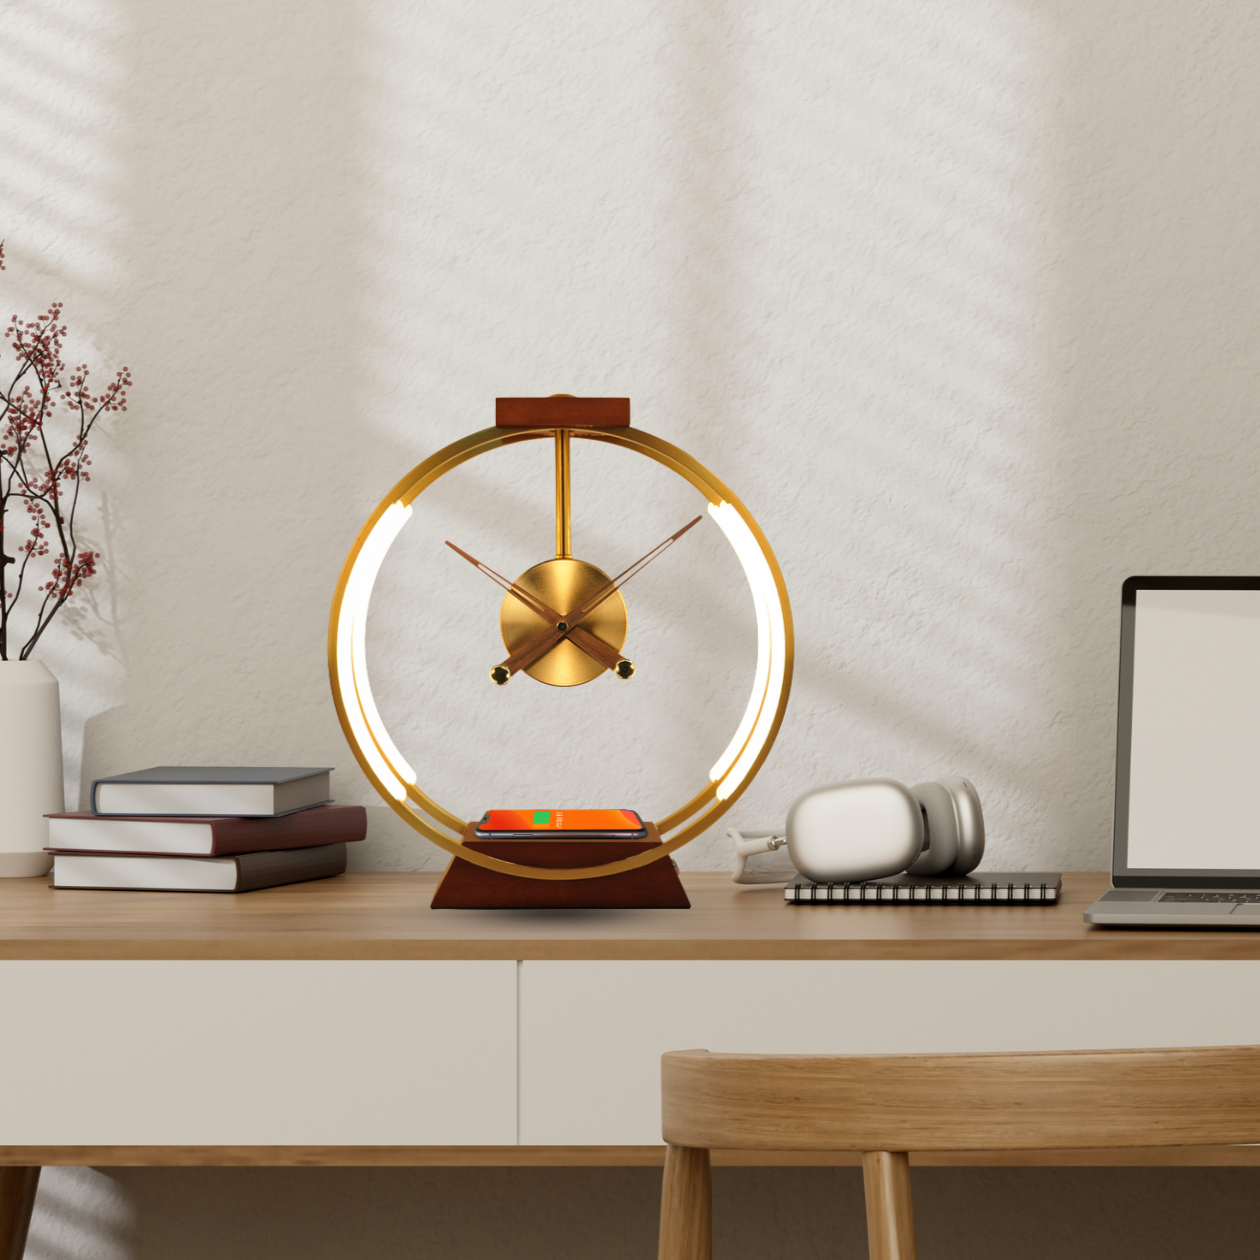 5 in 1 Multifunction Round Analog Clock Desk Lamp - Wireless Charger, 3 Color LED Light and Analog Clock